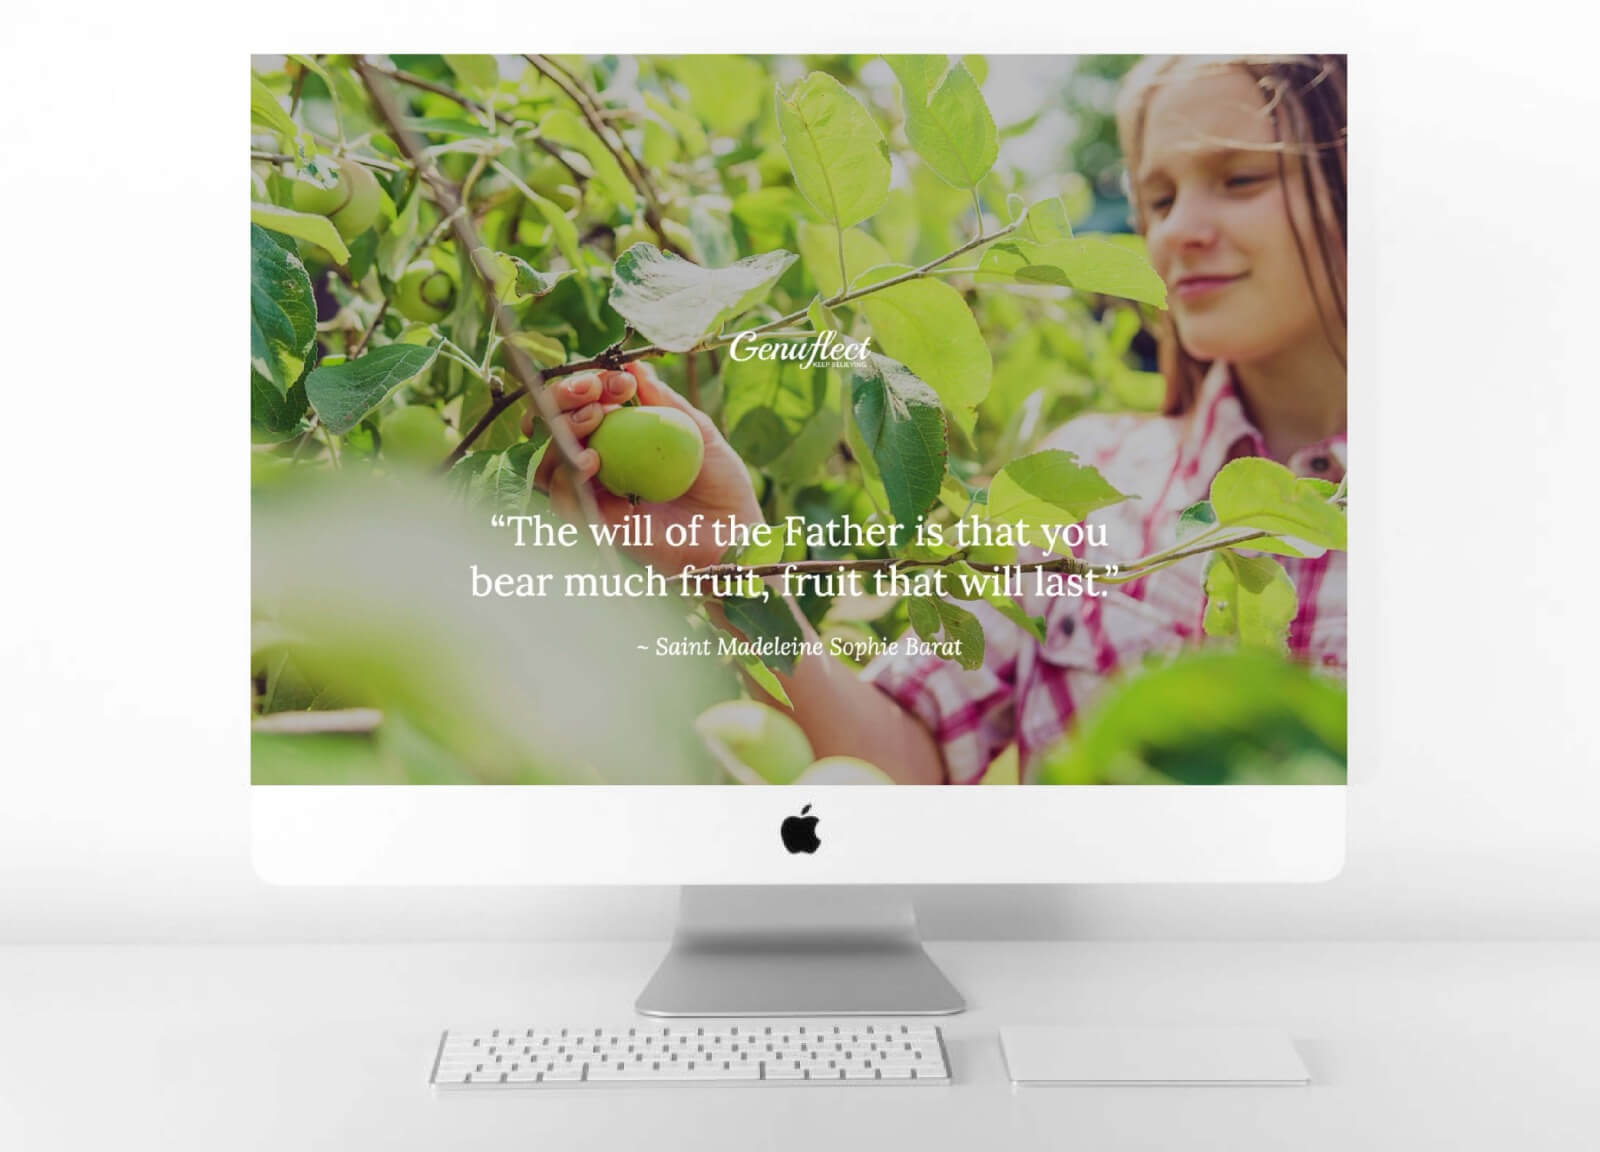 Genuflect computer background image of a Girl in an orchard picking a green apple in the sunshine